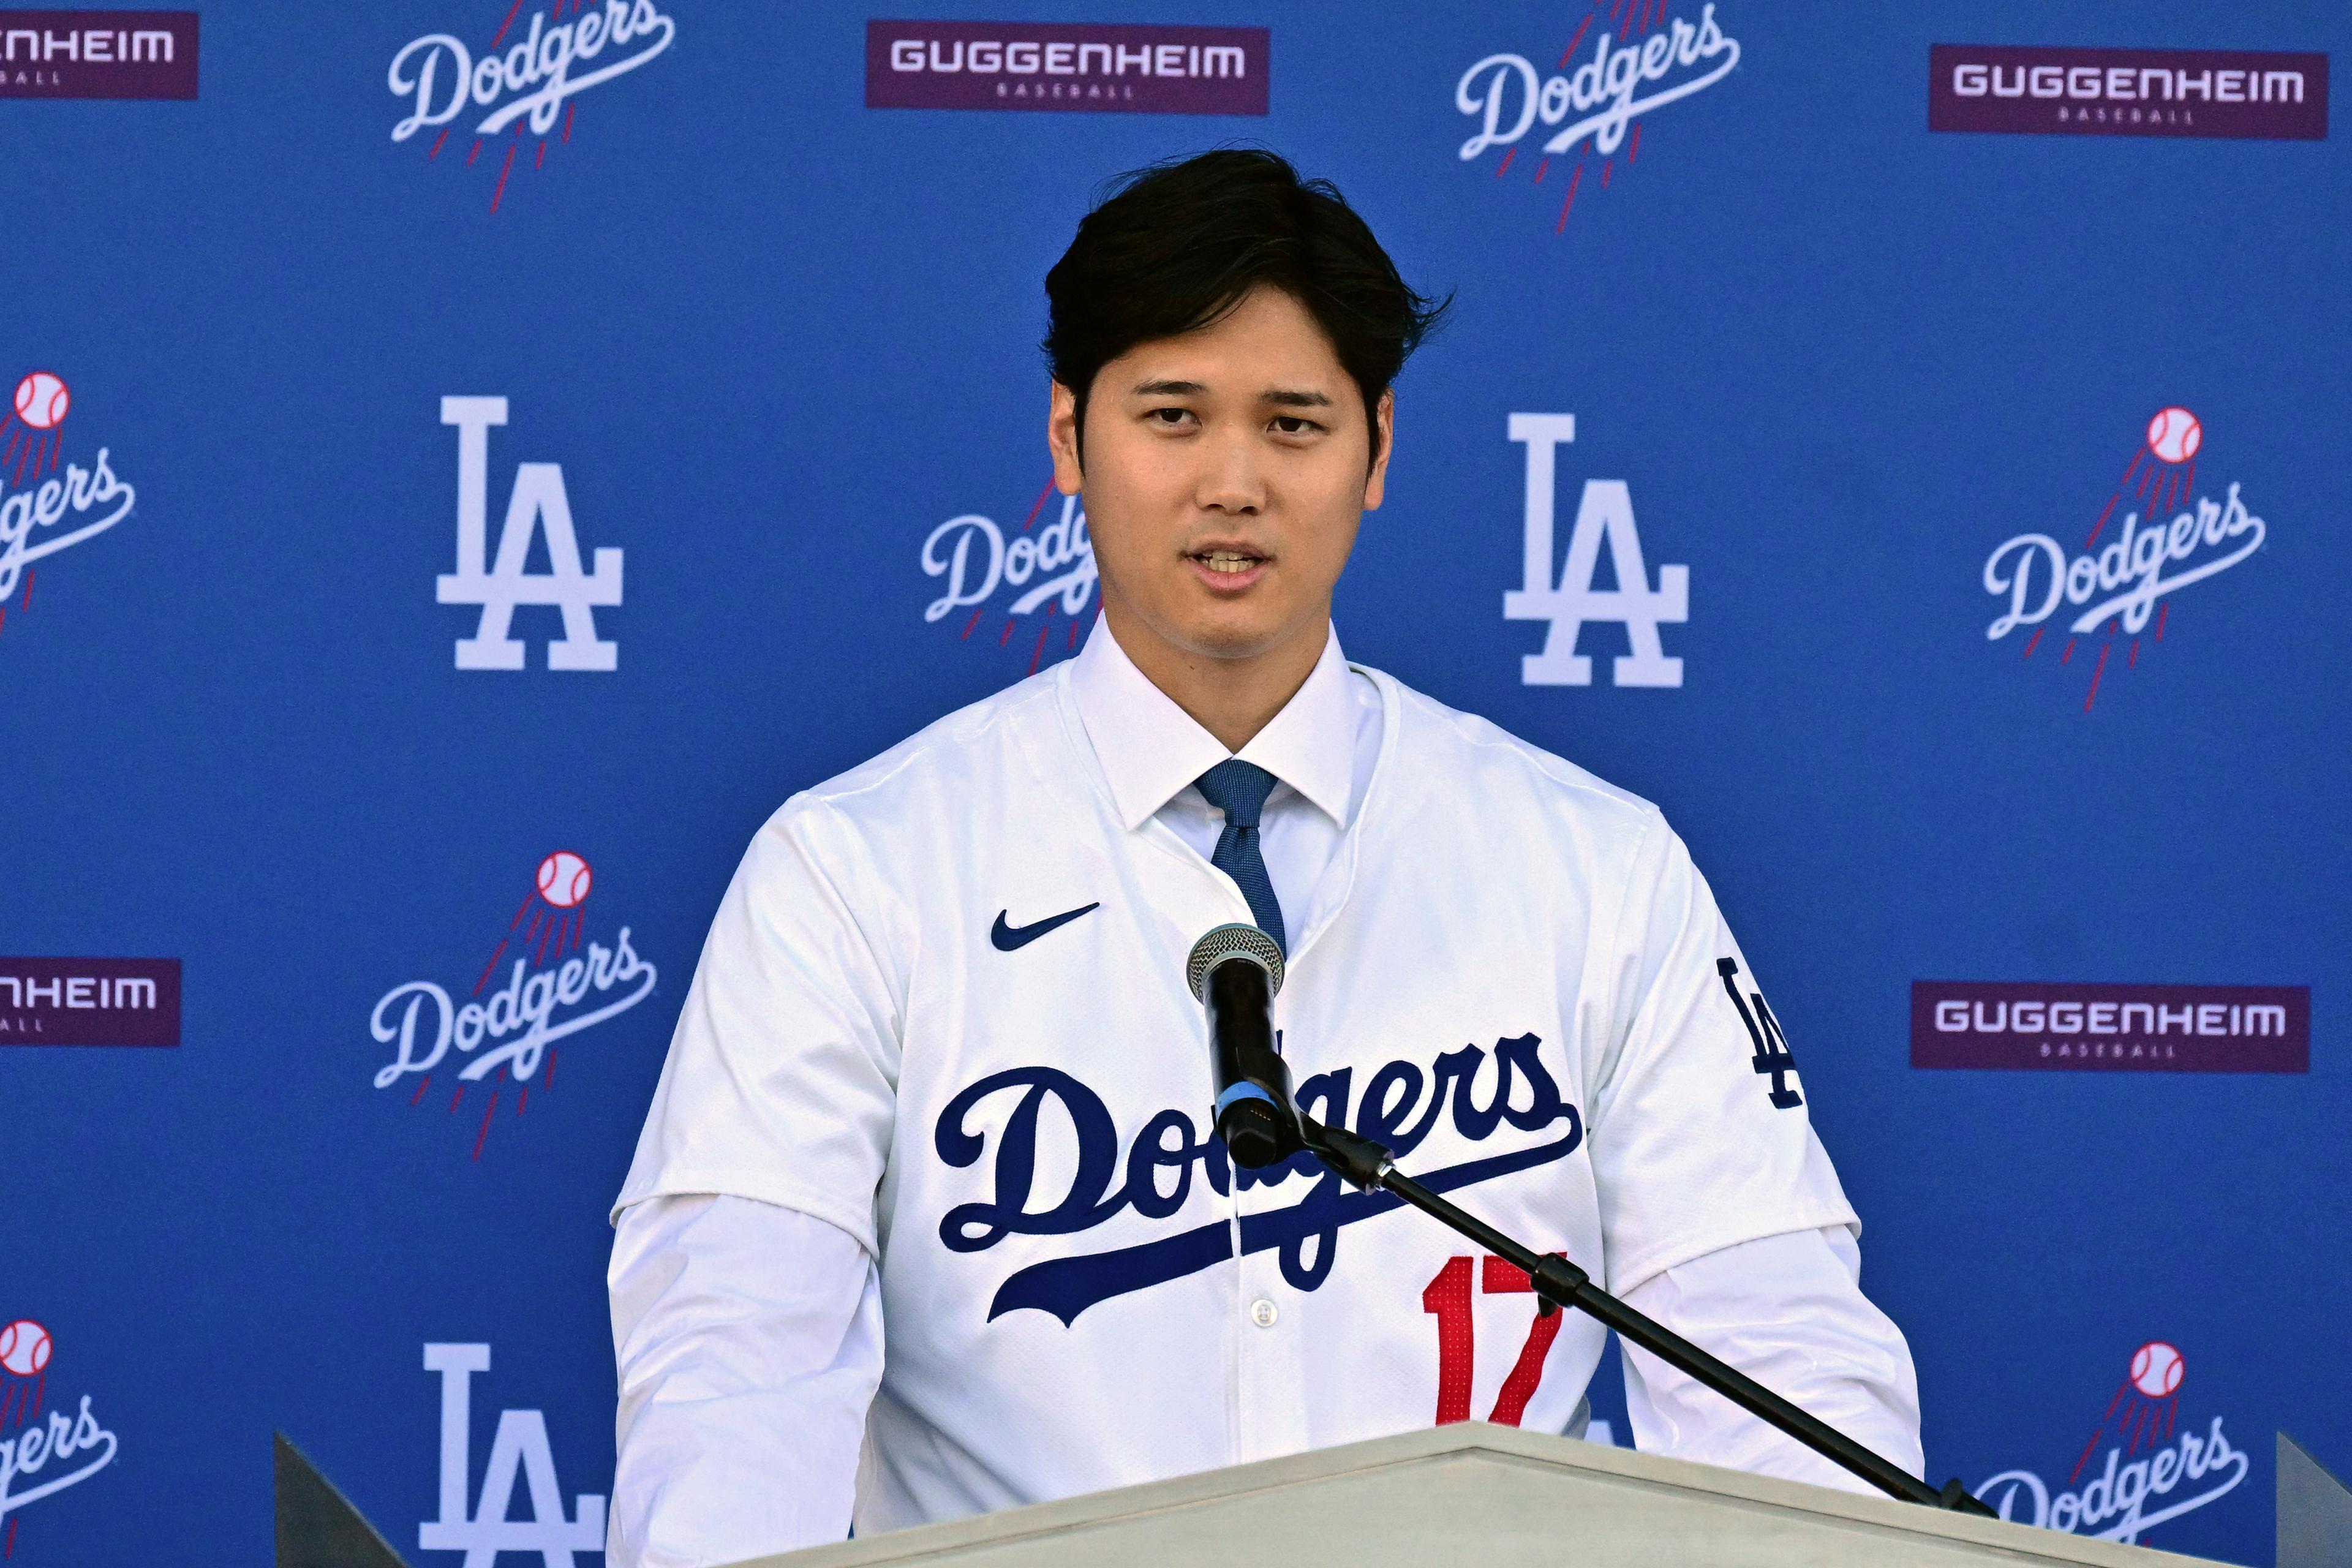 Los Angeles Dodgers, Shohei Ohtani Donate $1 Million to Japan for Earthquake Relief